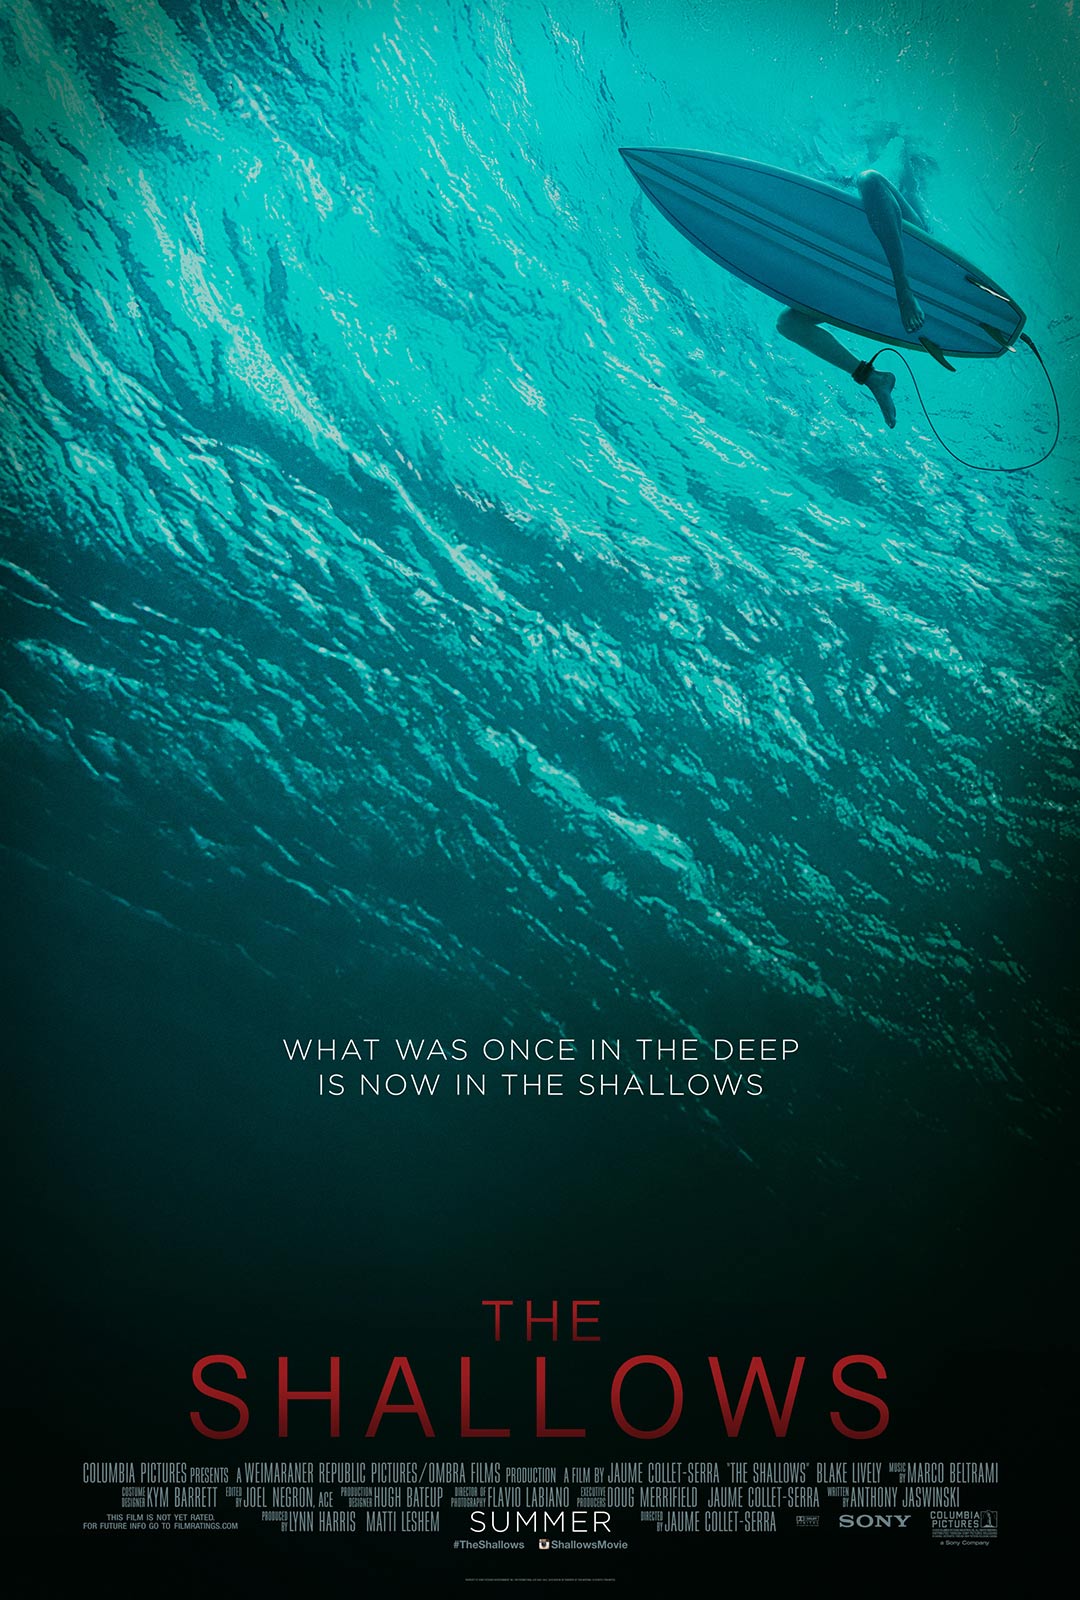 http://cdn.traileraddict.com/content/sony-pictures/the-shallows-poster.jpg